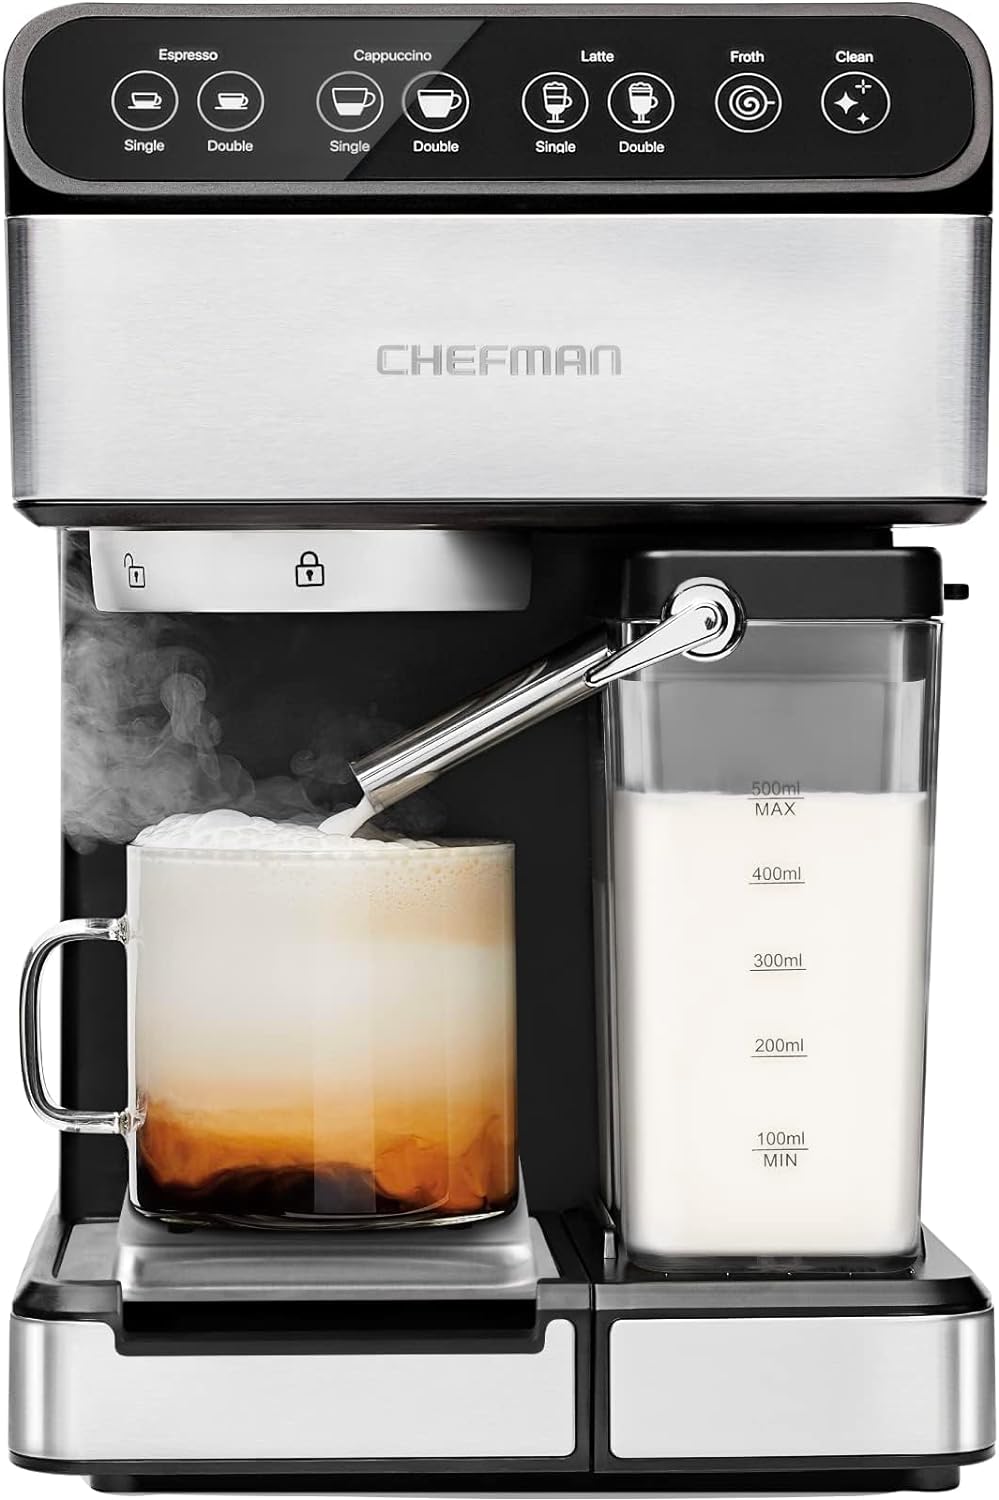 Chefman 6-in-1 Espresso Machine with Built-In Milk Frother, 15-BAR Pump, Digital Display, One-Touch Single or Double Shot for Cappuccinos and Lattes, XL 1.8-L Water Reservoir, Stainless Steel